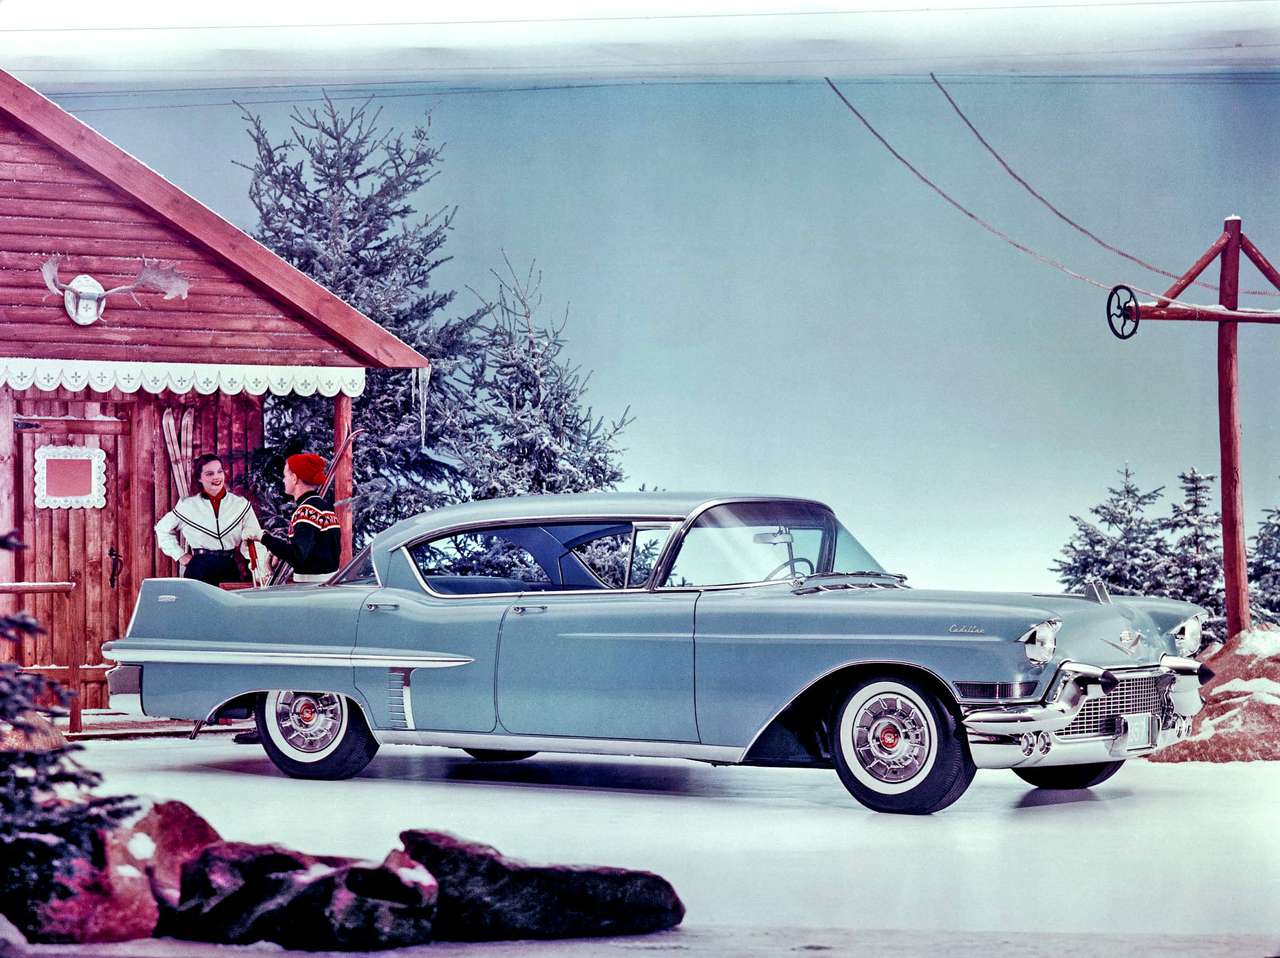 1957 Cadillac Sixty-Two hardtop puzzle online